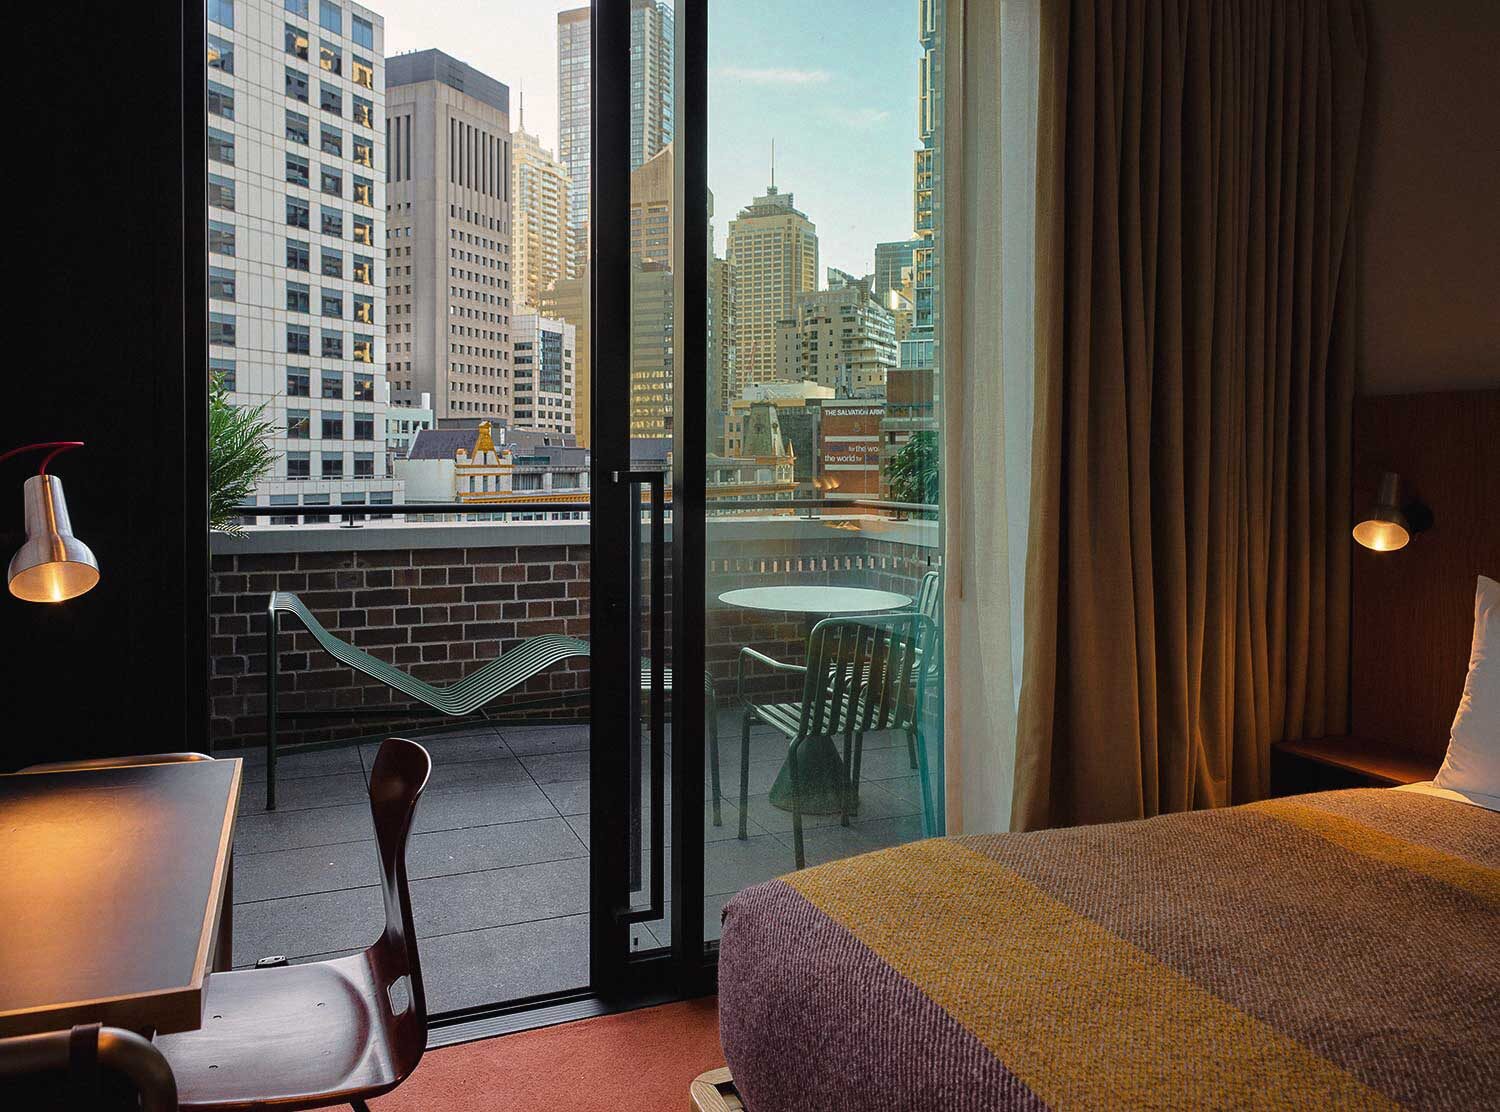 Ace Hotel Sydney Comfortable room and the arresting skyline beyond